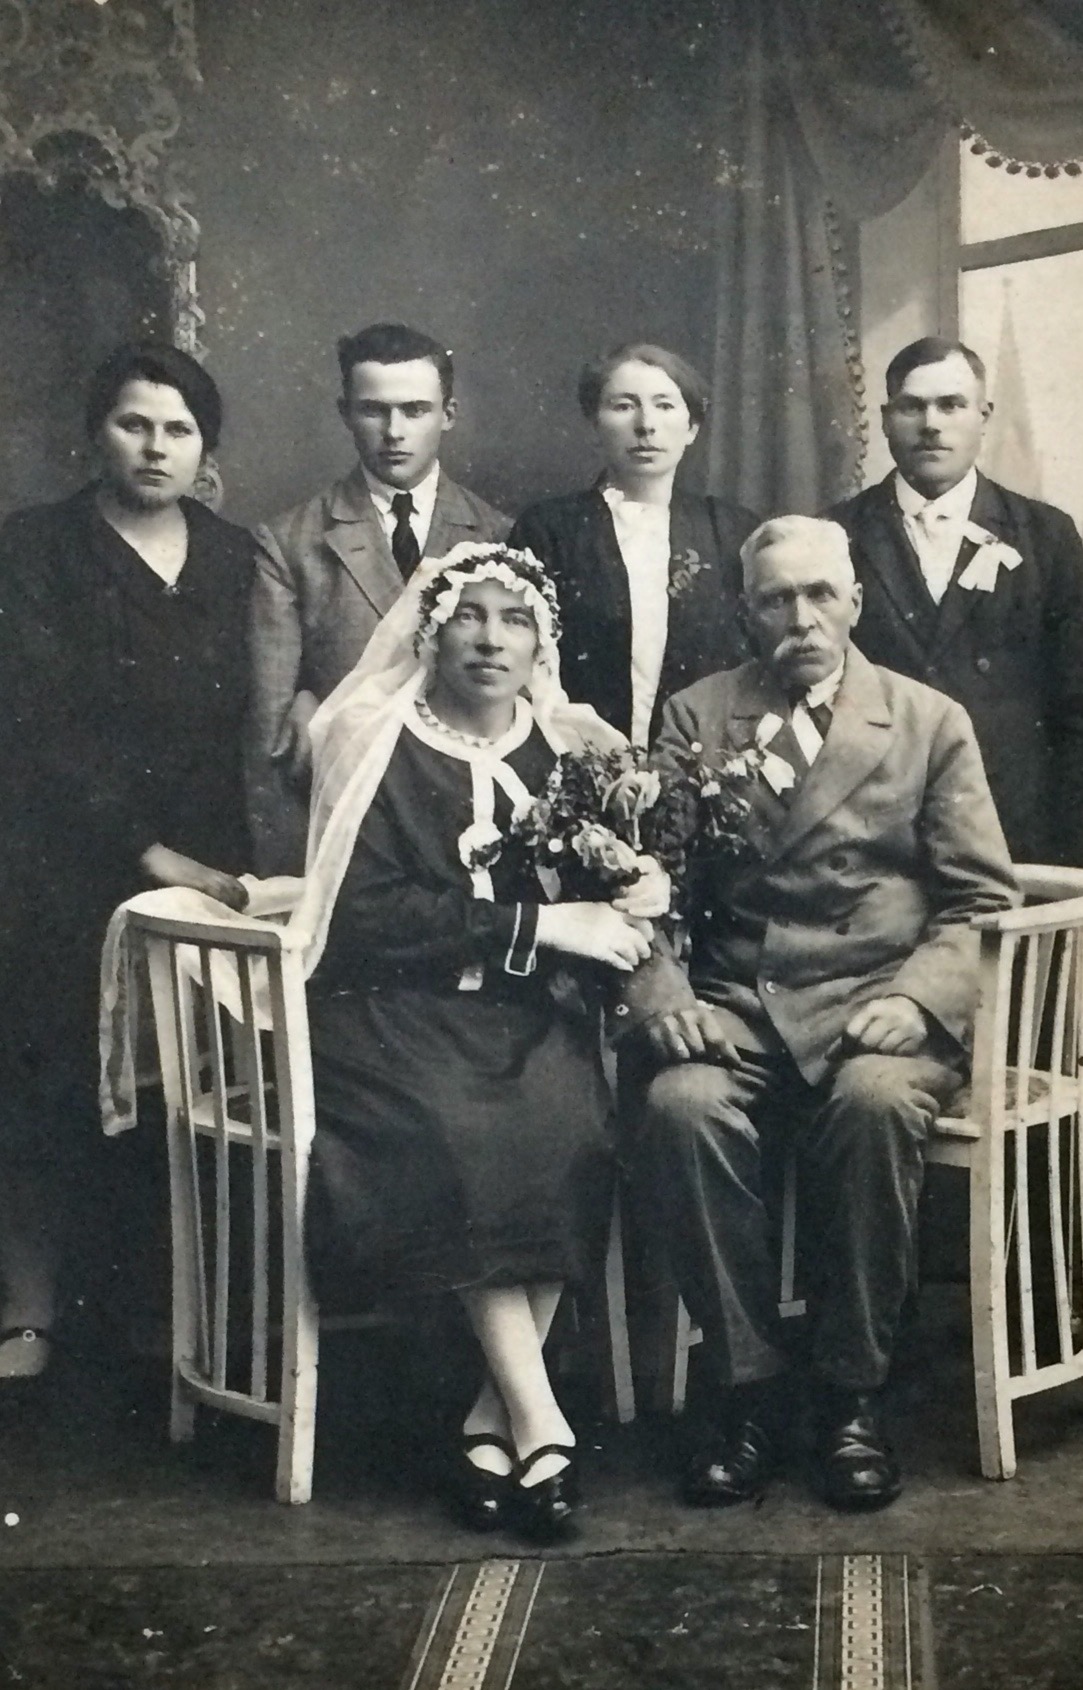 Beier - Leier?? Who know's this family??, pruissen between 1900 and 1950?